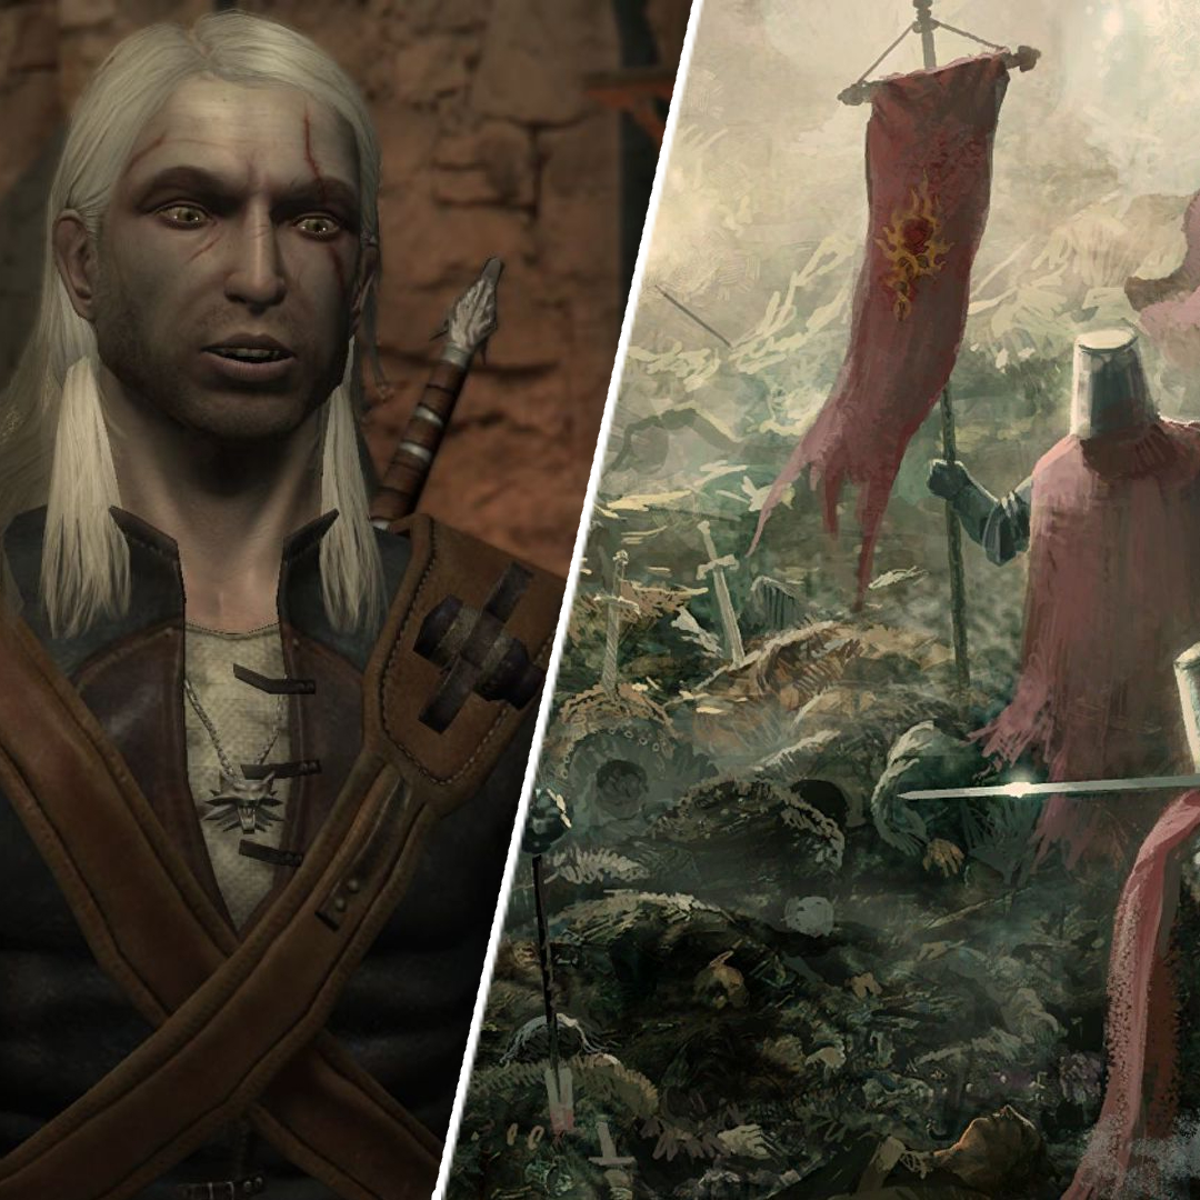 The Witcher 1 is not the obvious remake candidate you might think